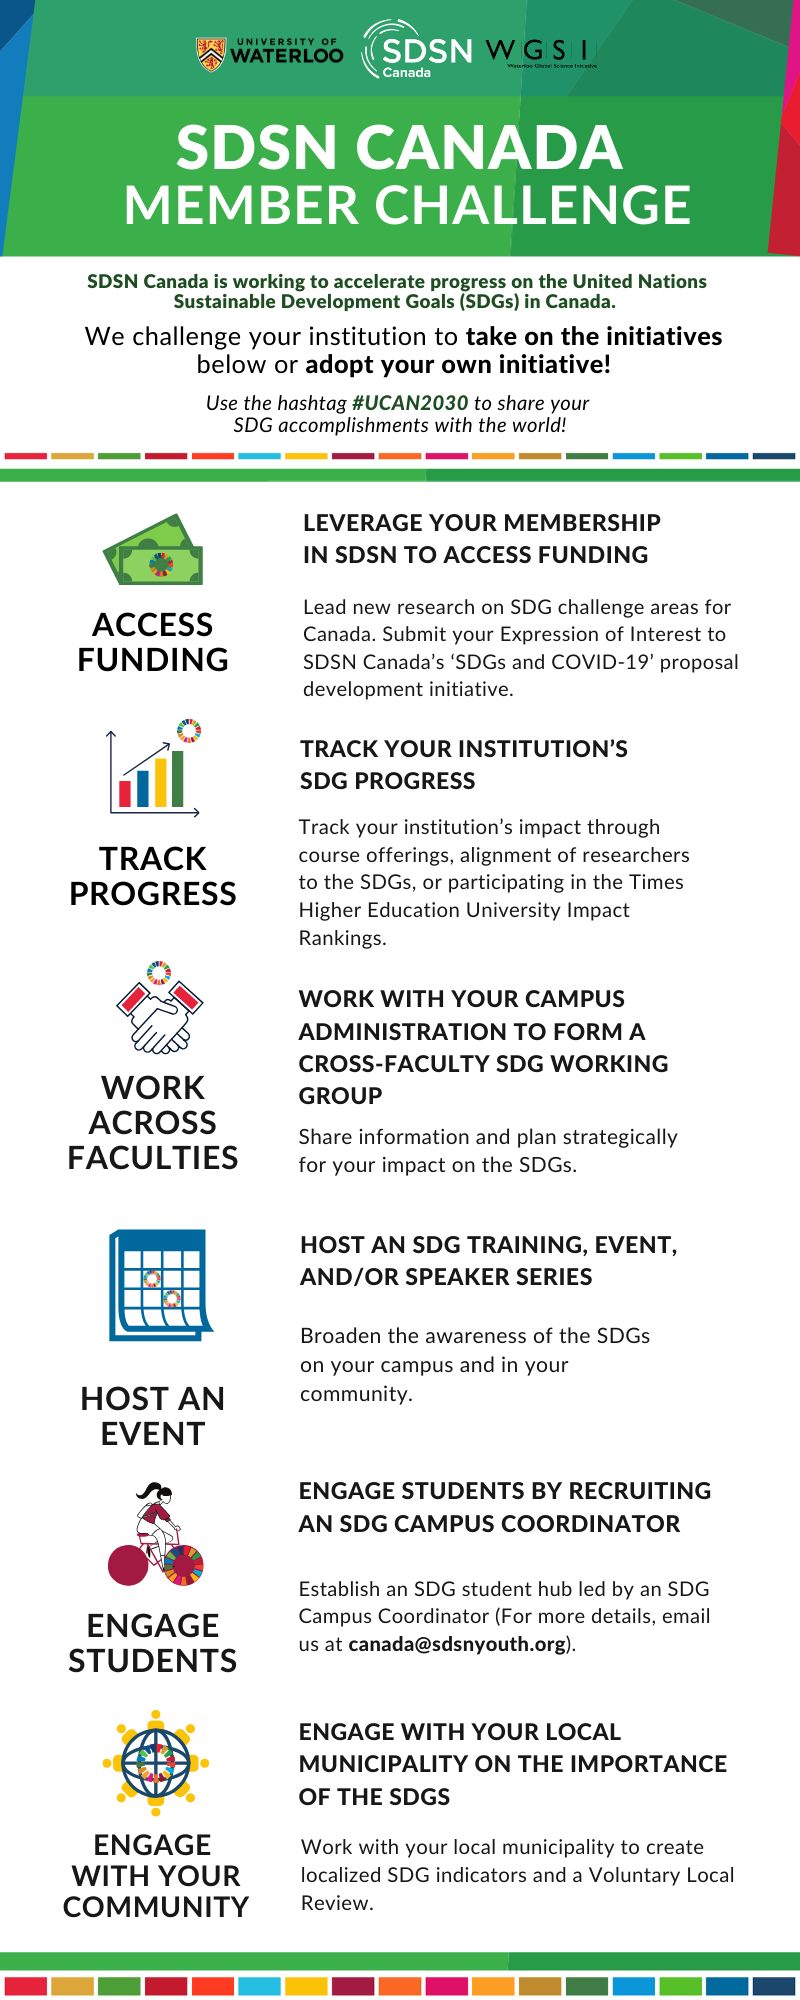 SDSN Canada Members Challenge Infographic